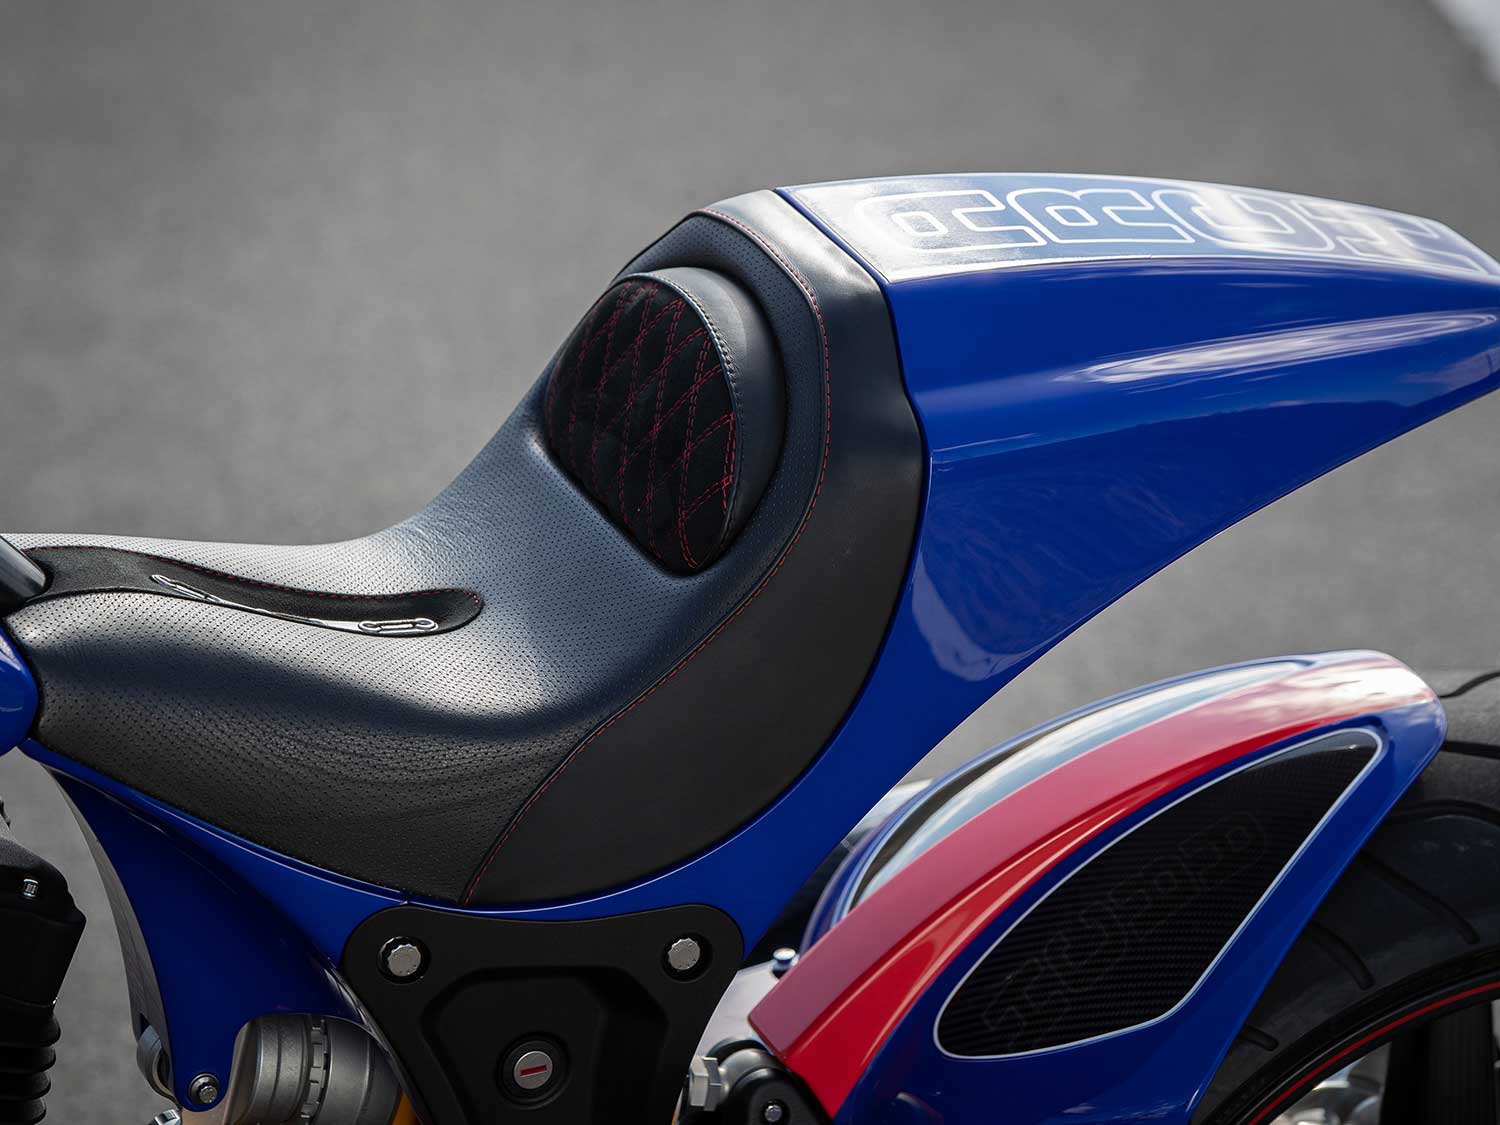 A new seat, new carbon fiber fenders, as well as a redesigned tailsection are meant to improve comfort and contact.